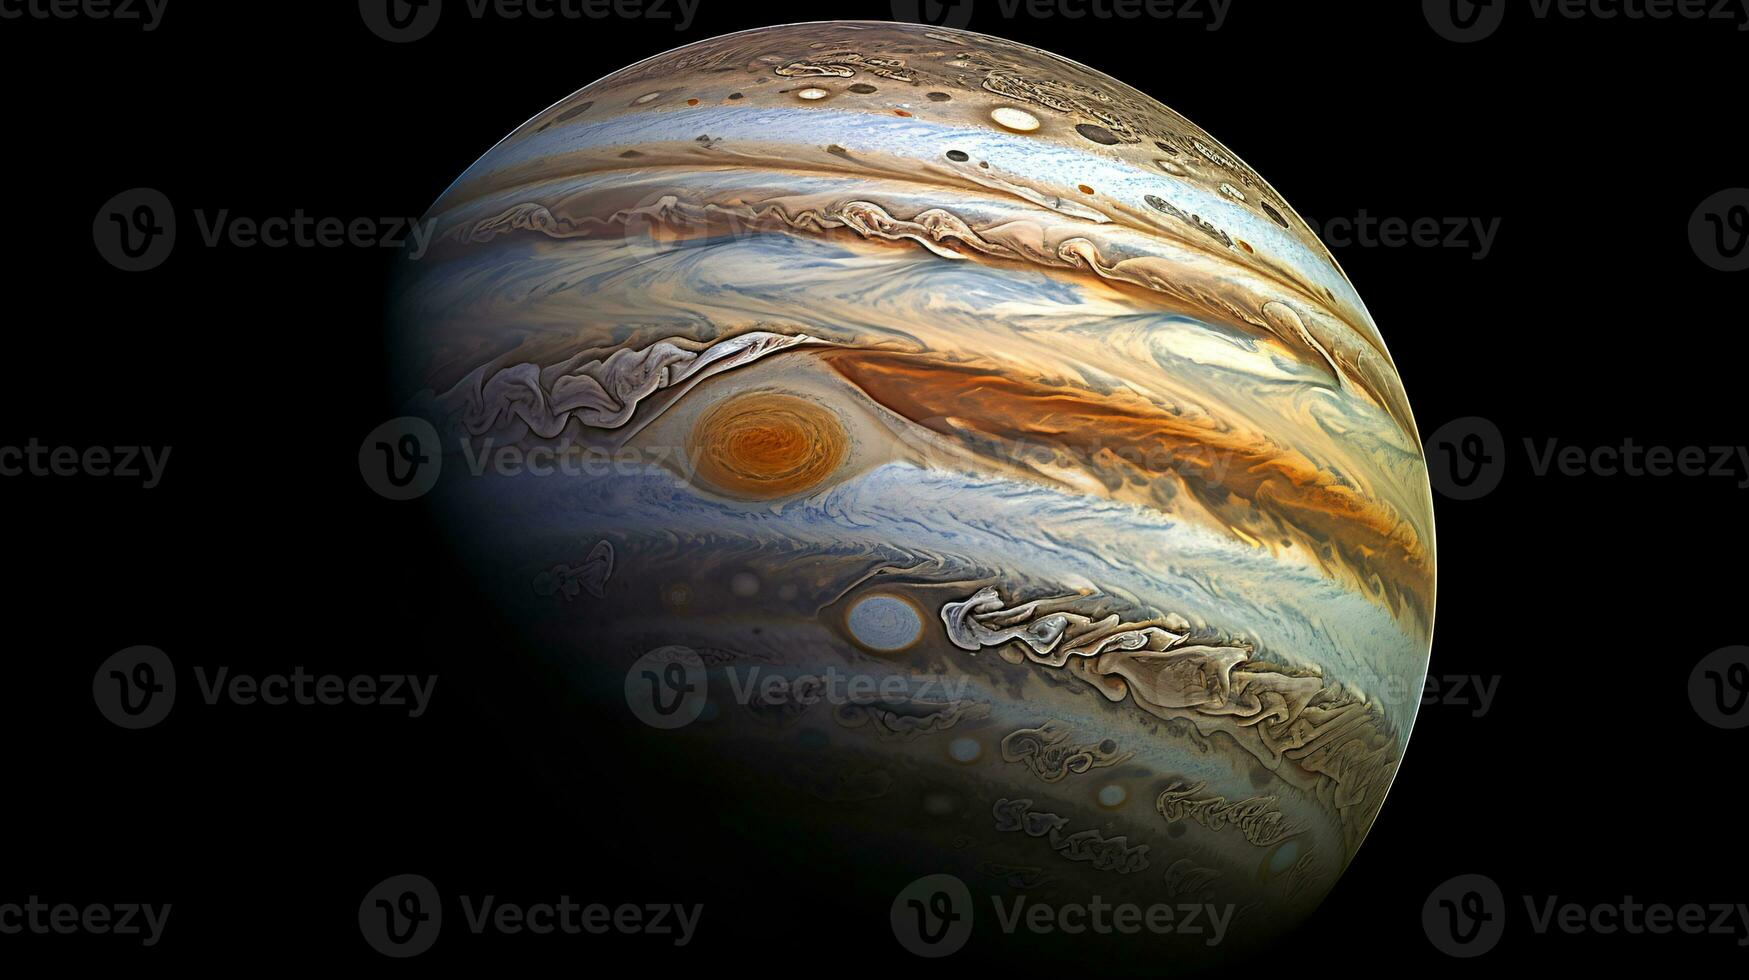 Captivating portrayal of Jupiter and its moons capturing the gas giant's swirling storms in striking detail AI Generative photo